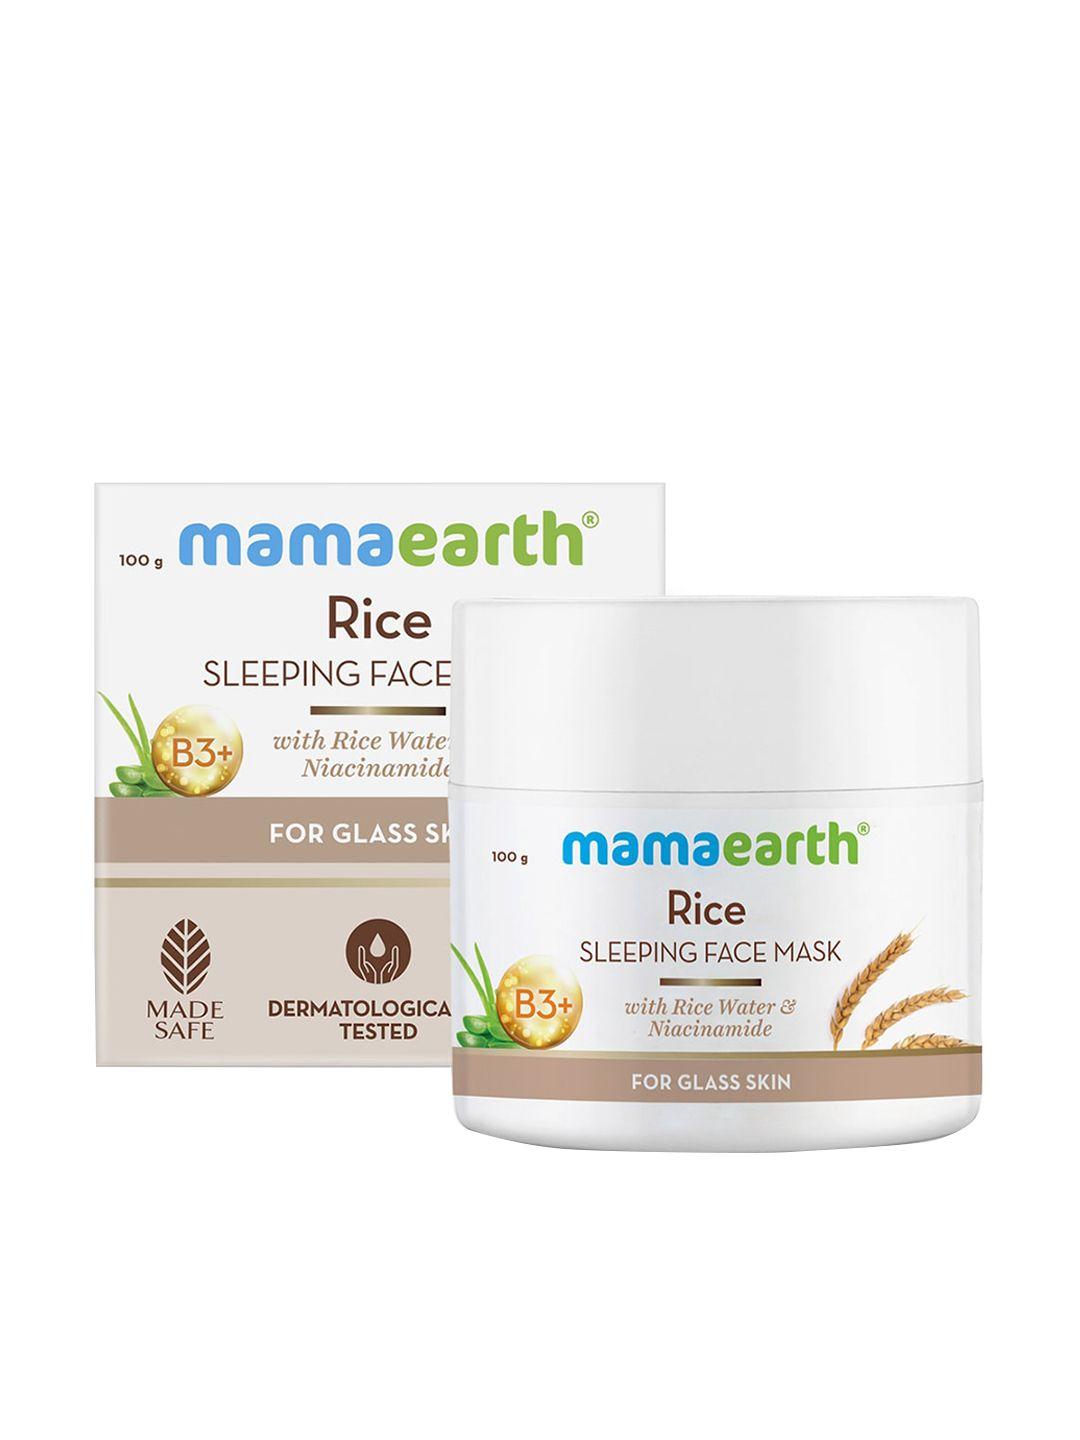 mamaearth rice sleeping face mask with rice water & niacinamide for glass skin - 100ml